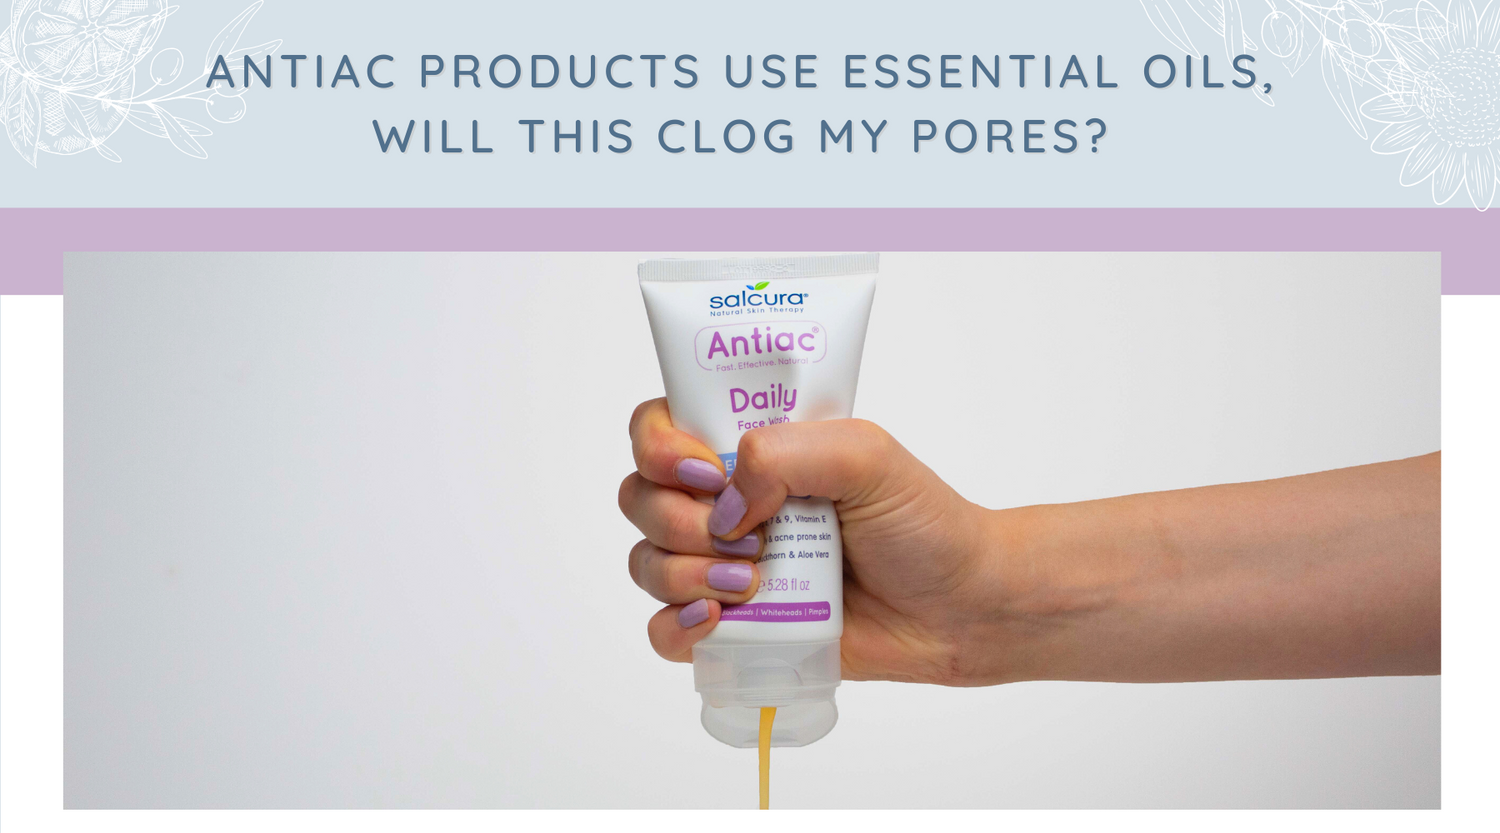 Antiac products use essential oils, will this clog my pores?